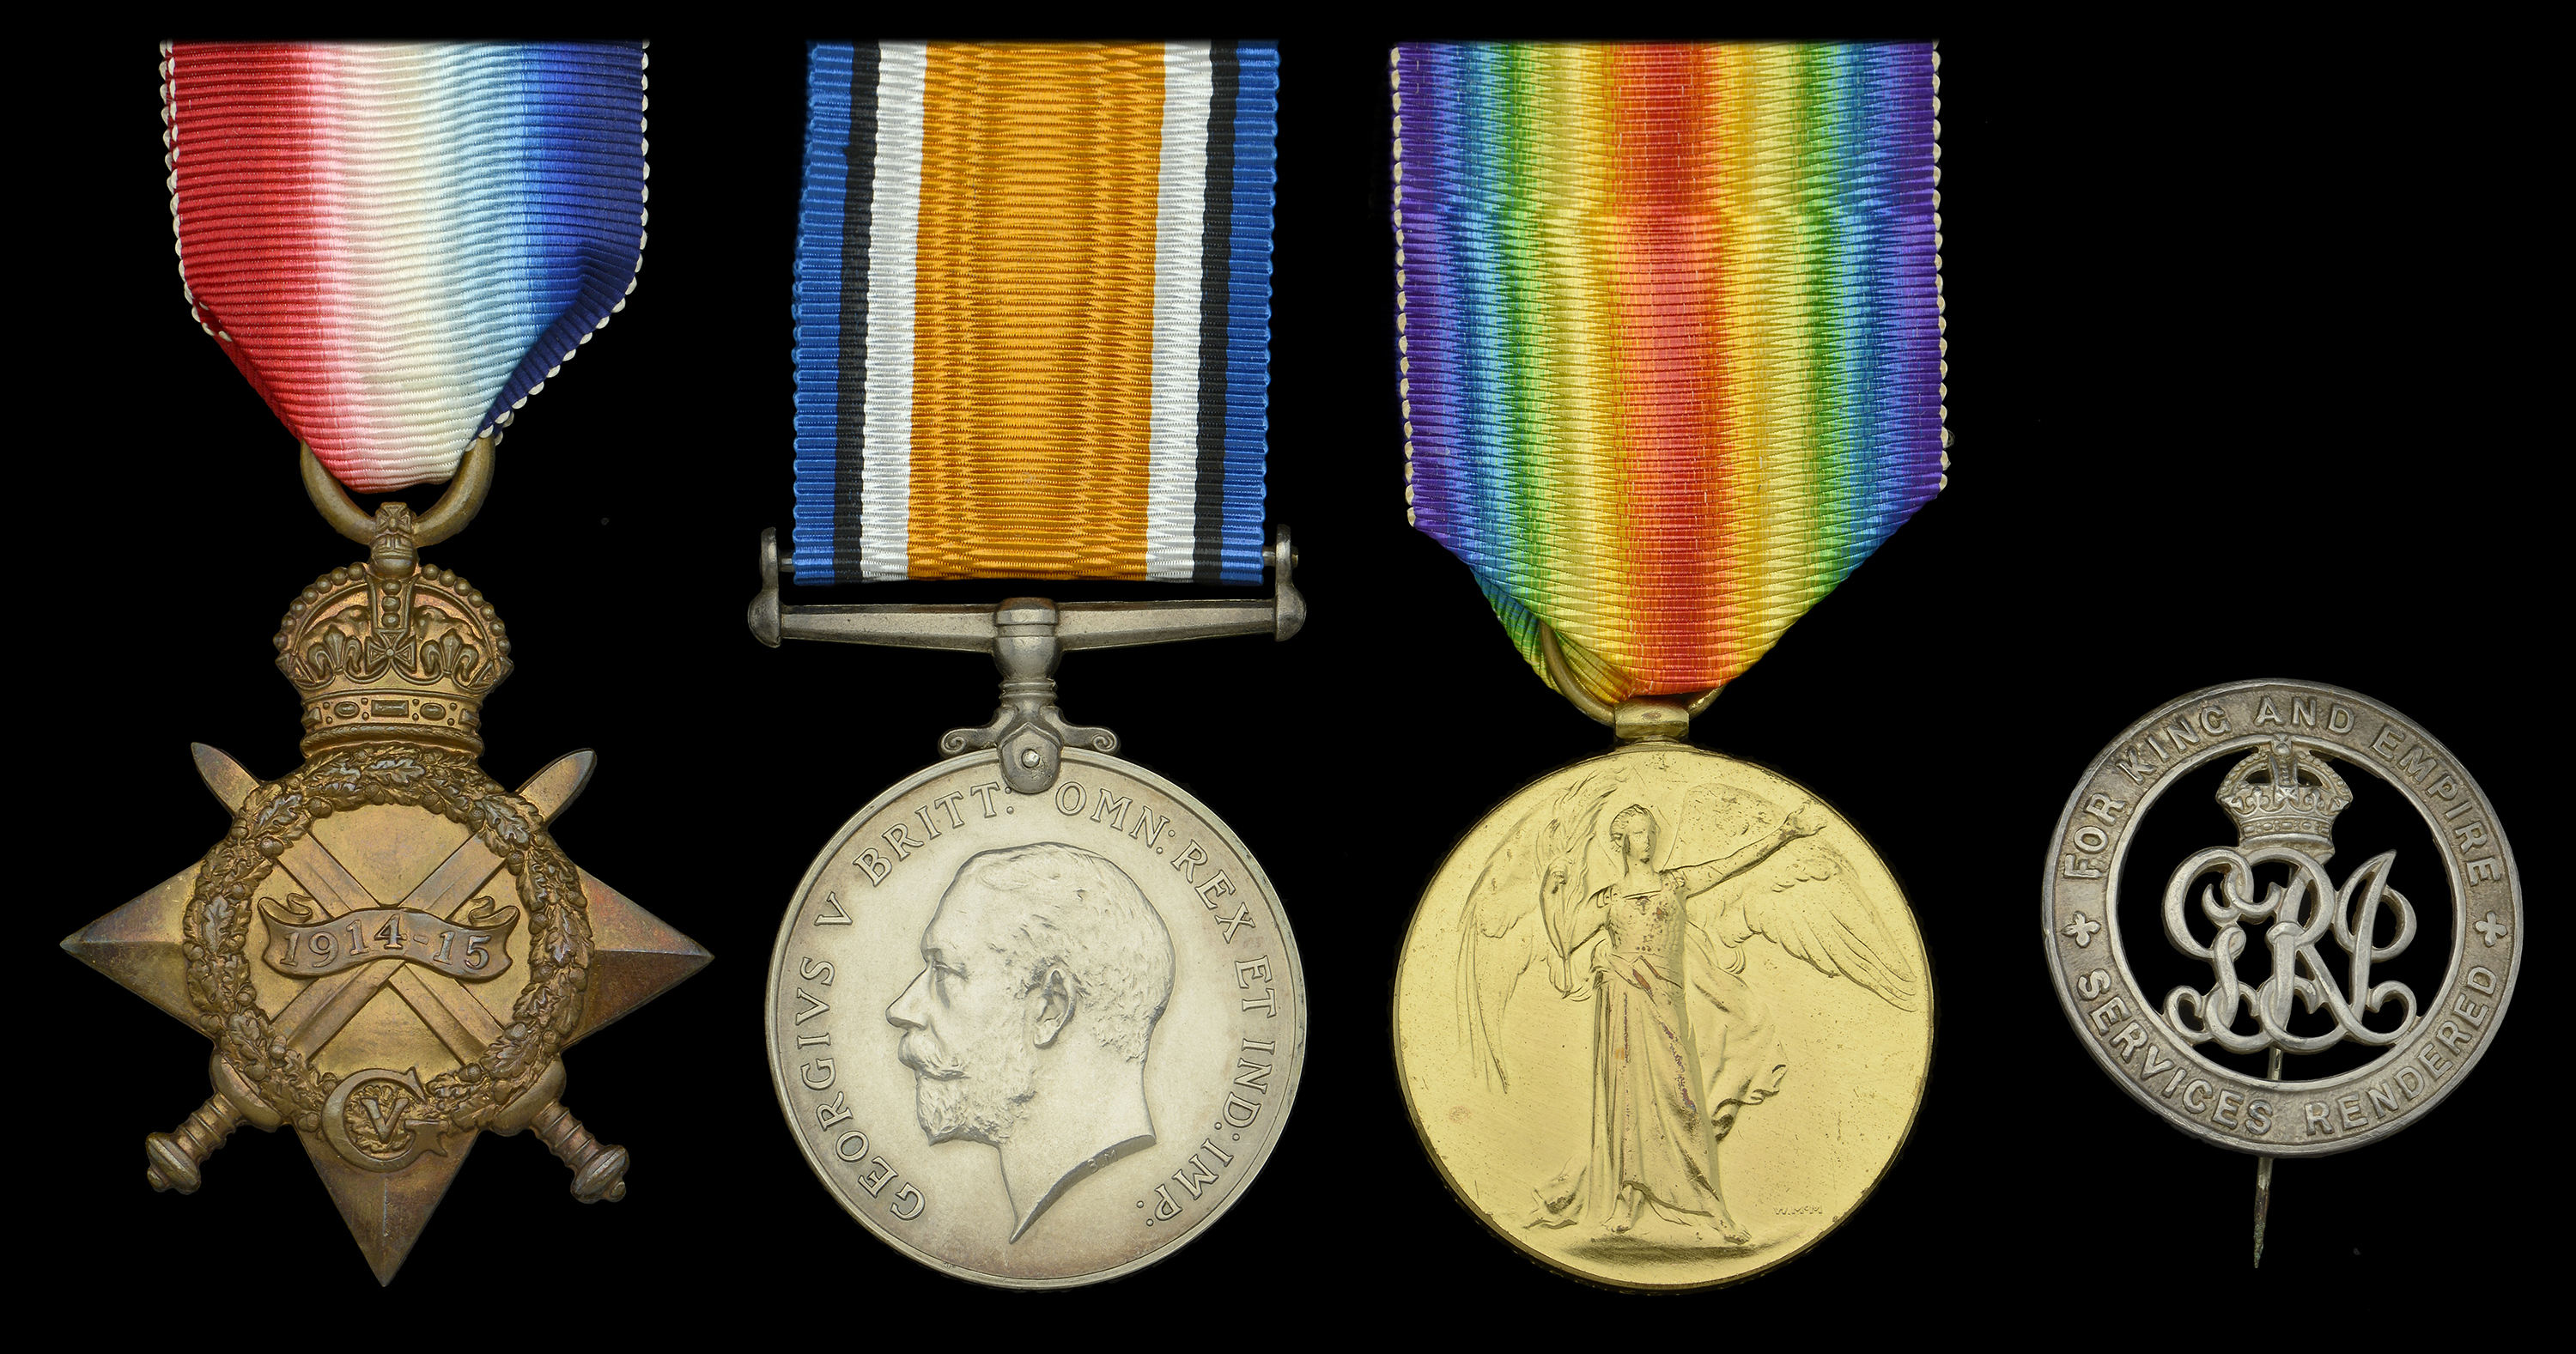 Medals from the Collection of the Soldiers of Oxfordshire Museum, Part 4